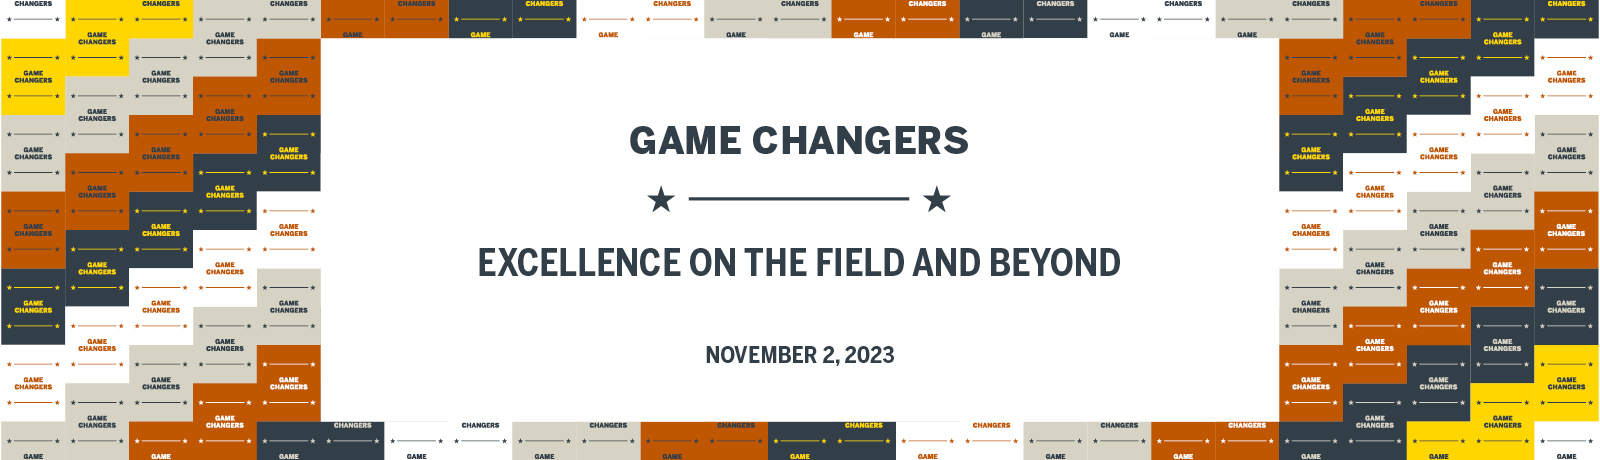 Banner image with the text "Game Changers Excellence on the Field and Beyond -November 2, 2023"